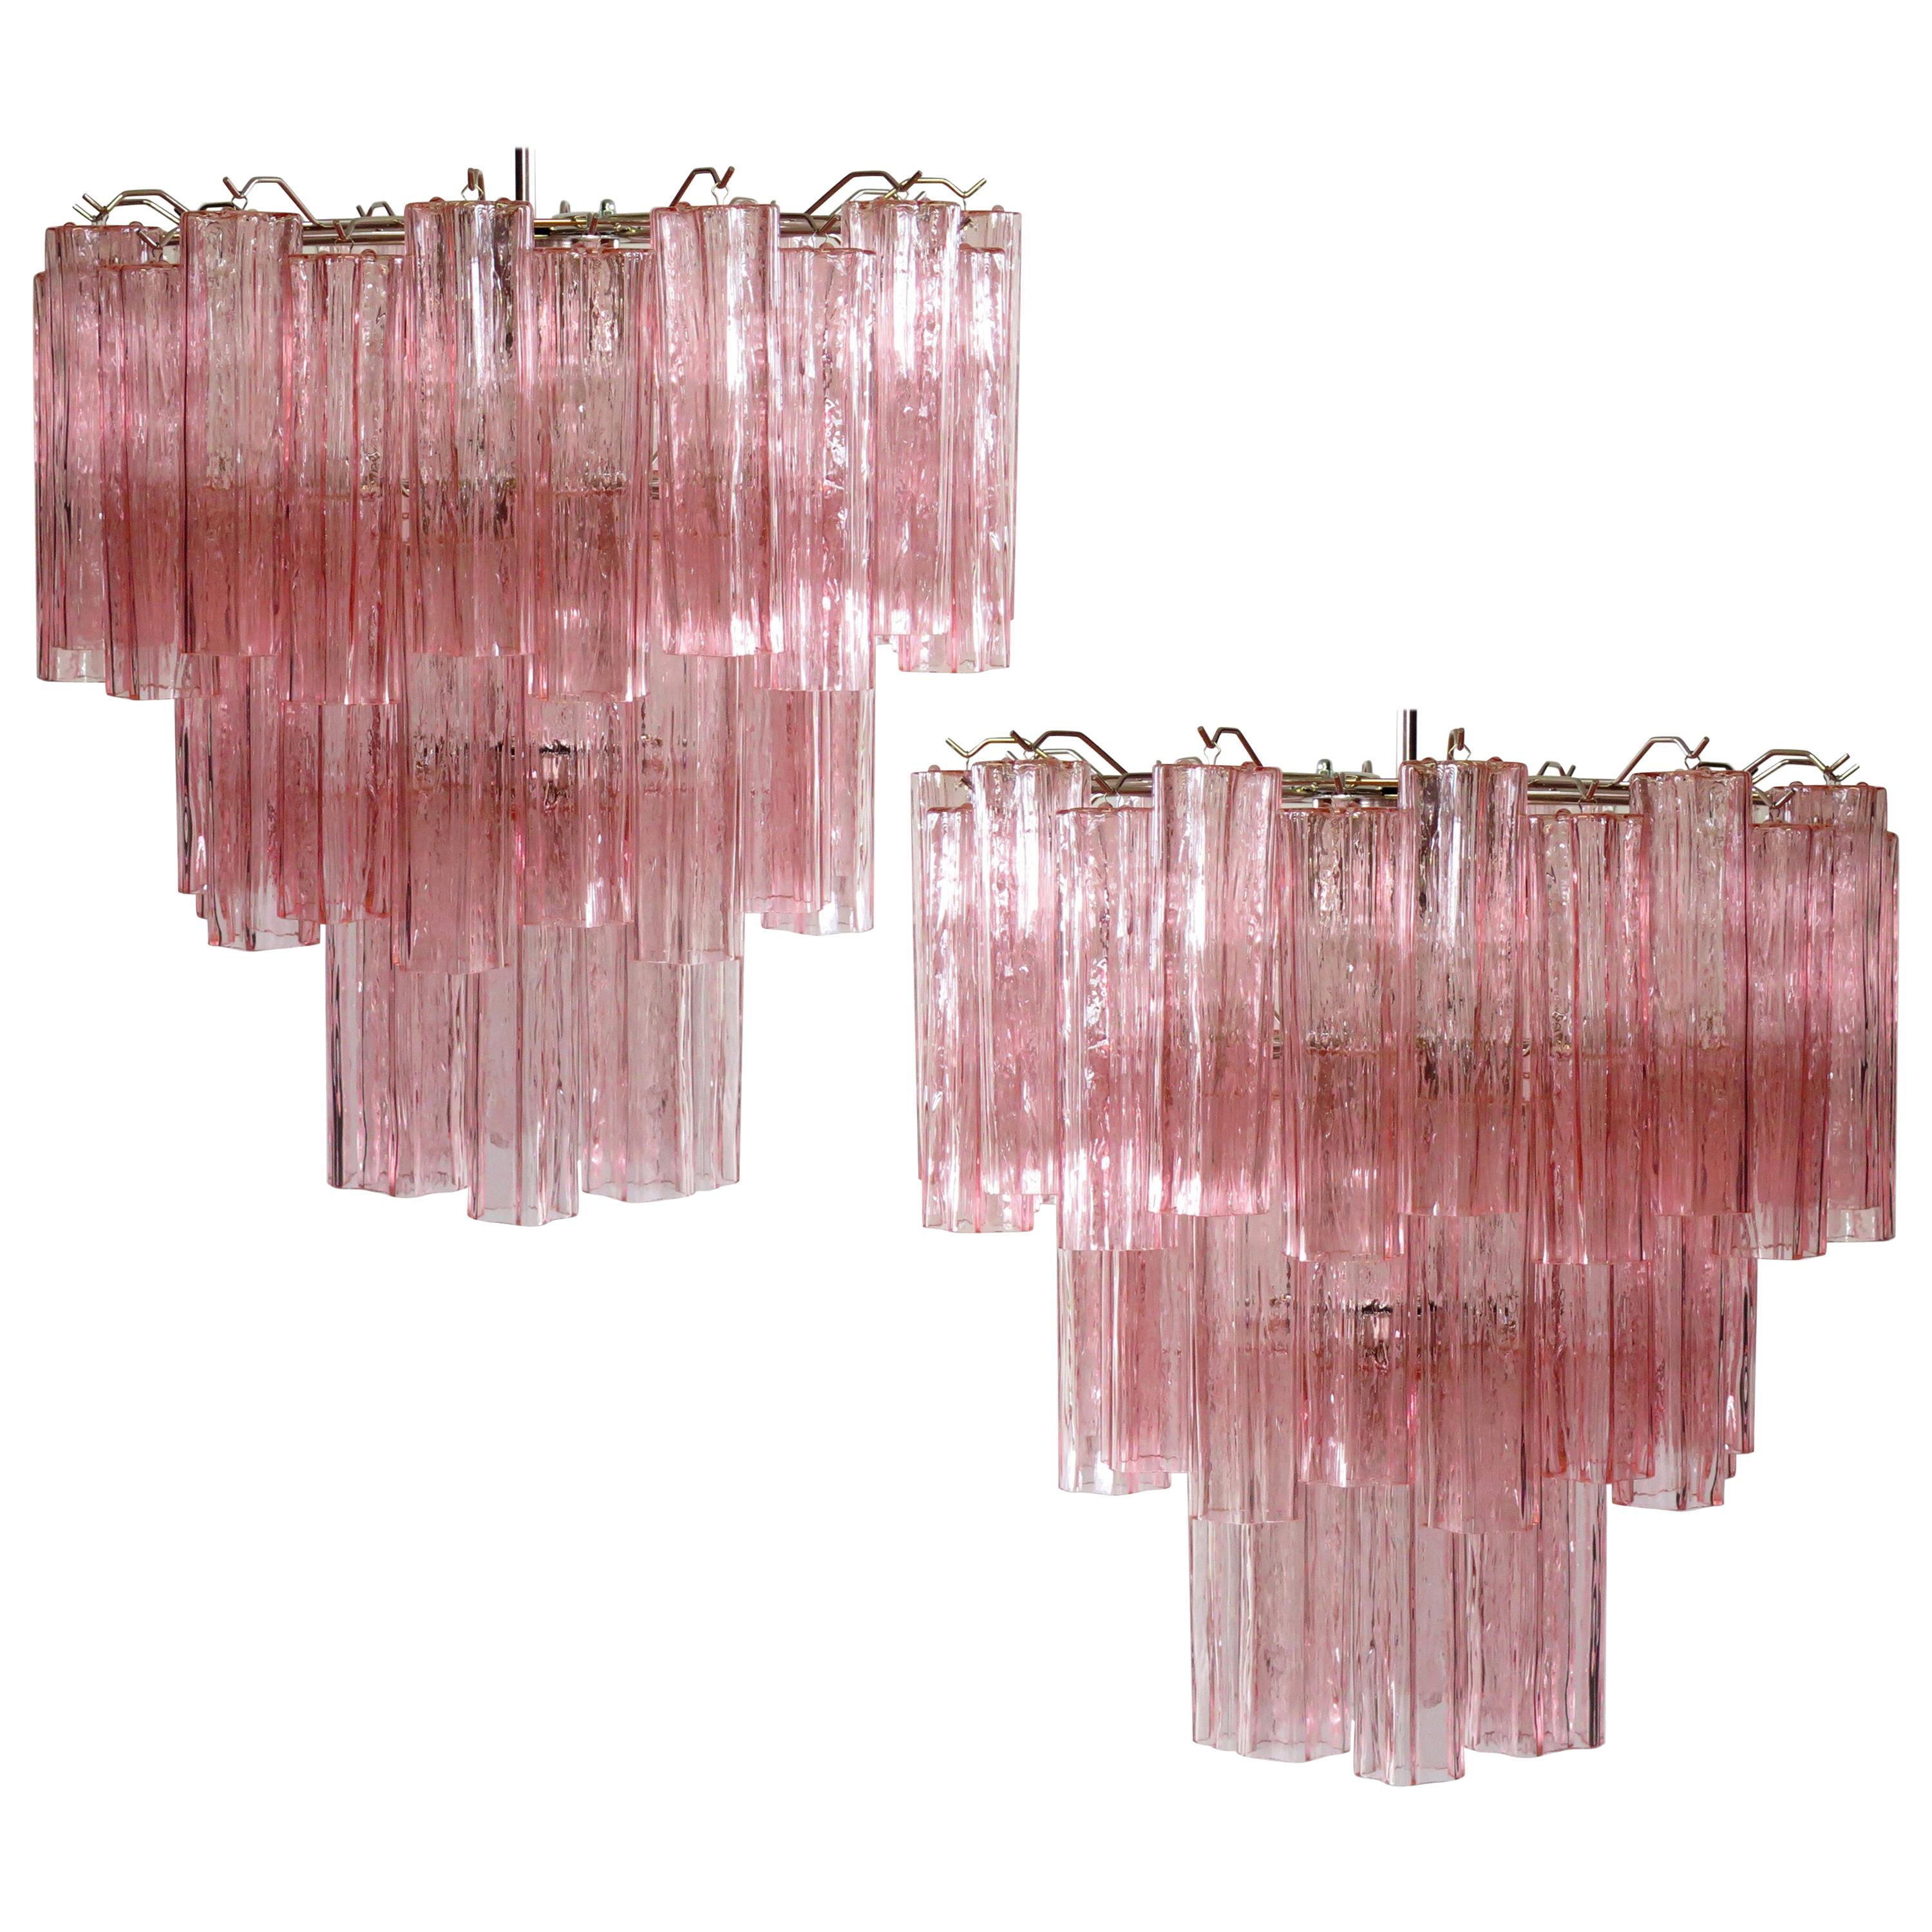 Pair of Tronchi Chandeliers, 48 Pink Glasses, Murano, 1990 For Sale